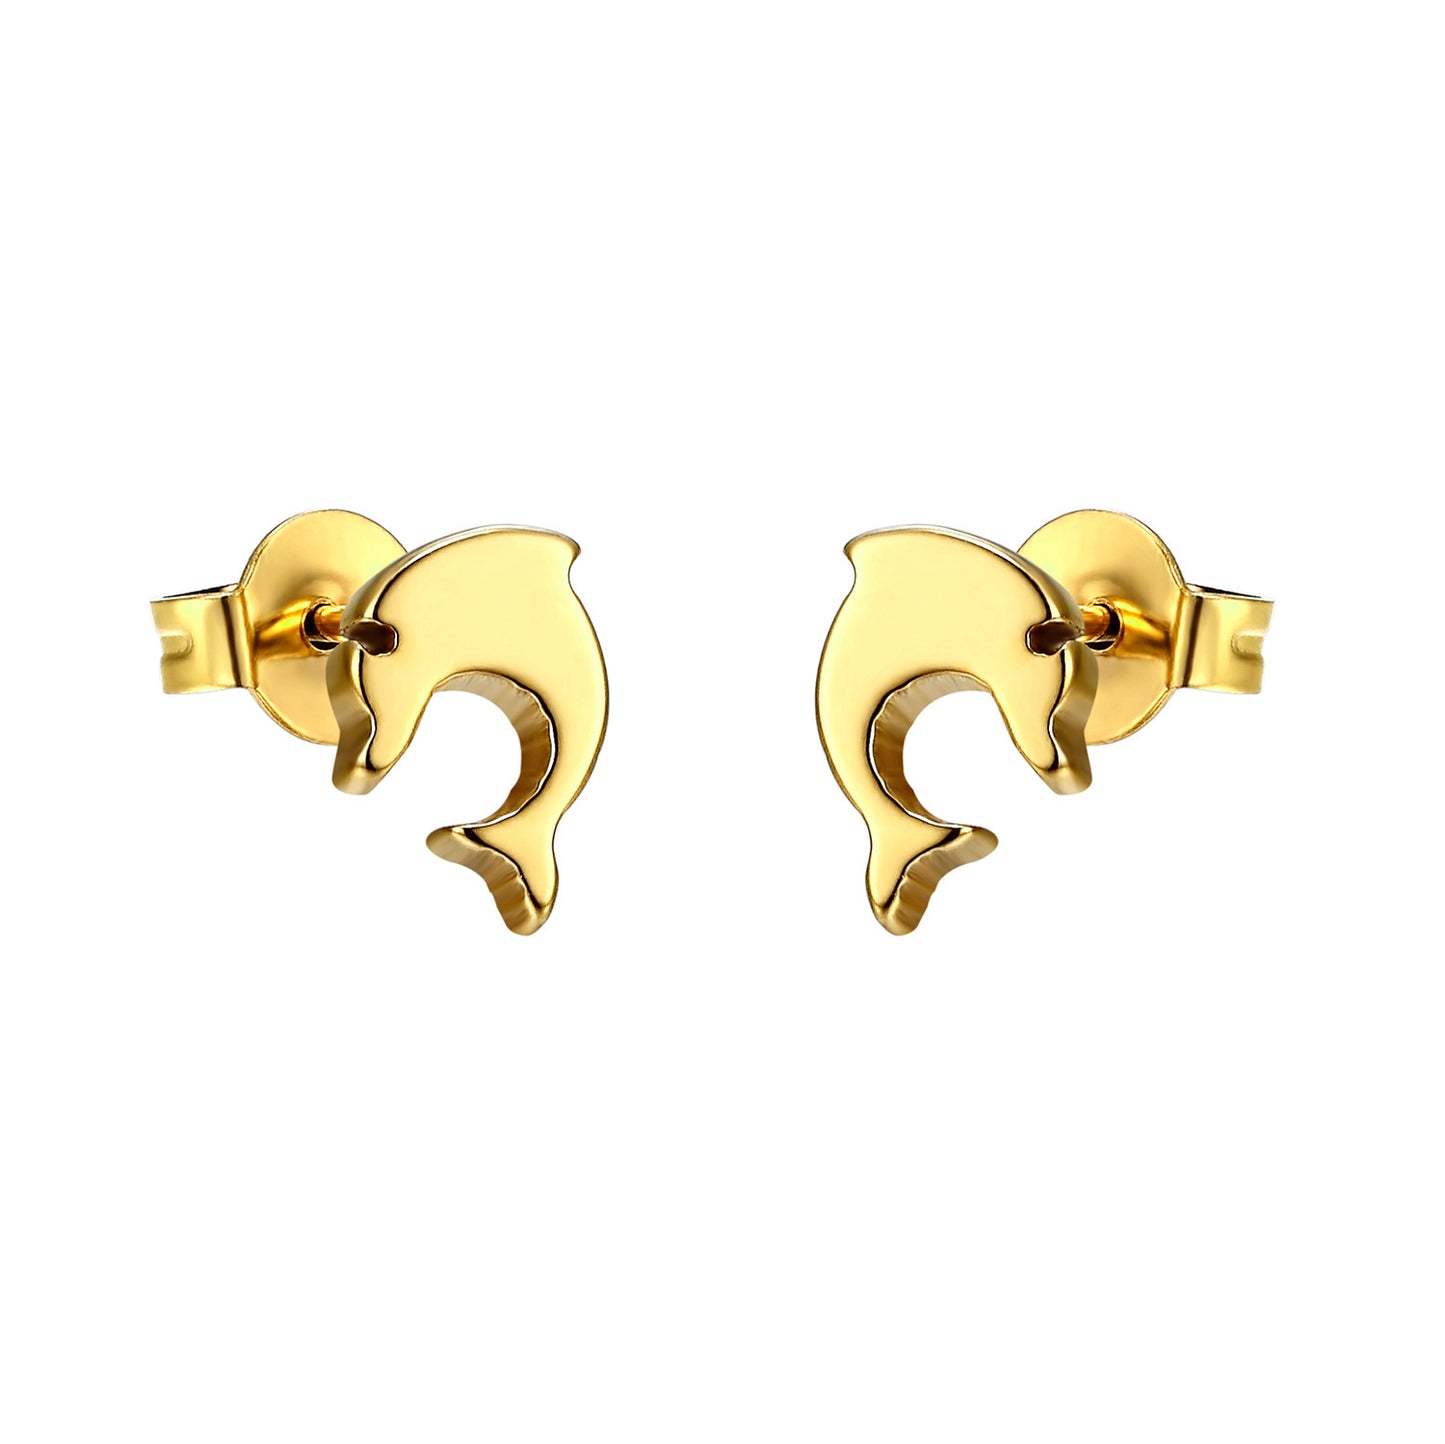 Stainless Steel Dolphin Earrings 14k Gold Plate 8mm Studs Womens Ladies Girls